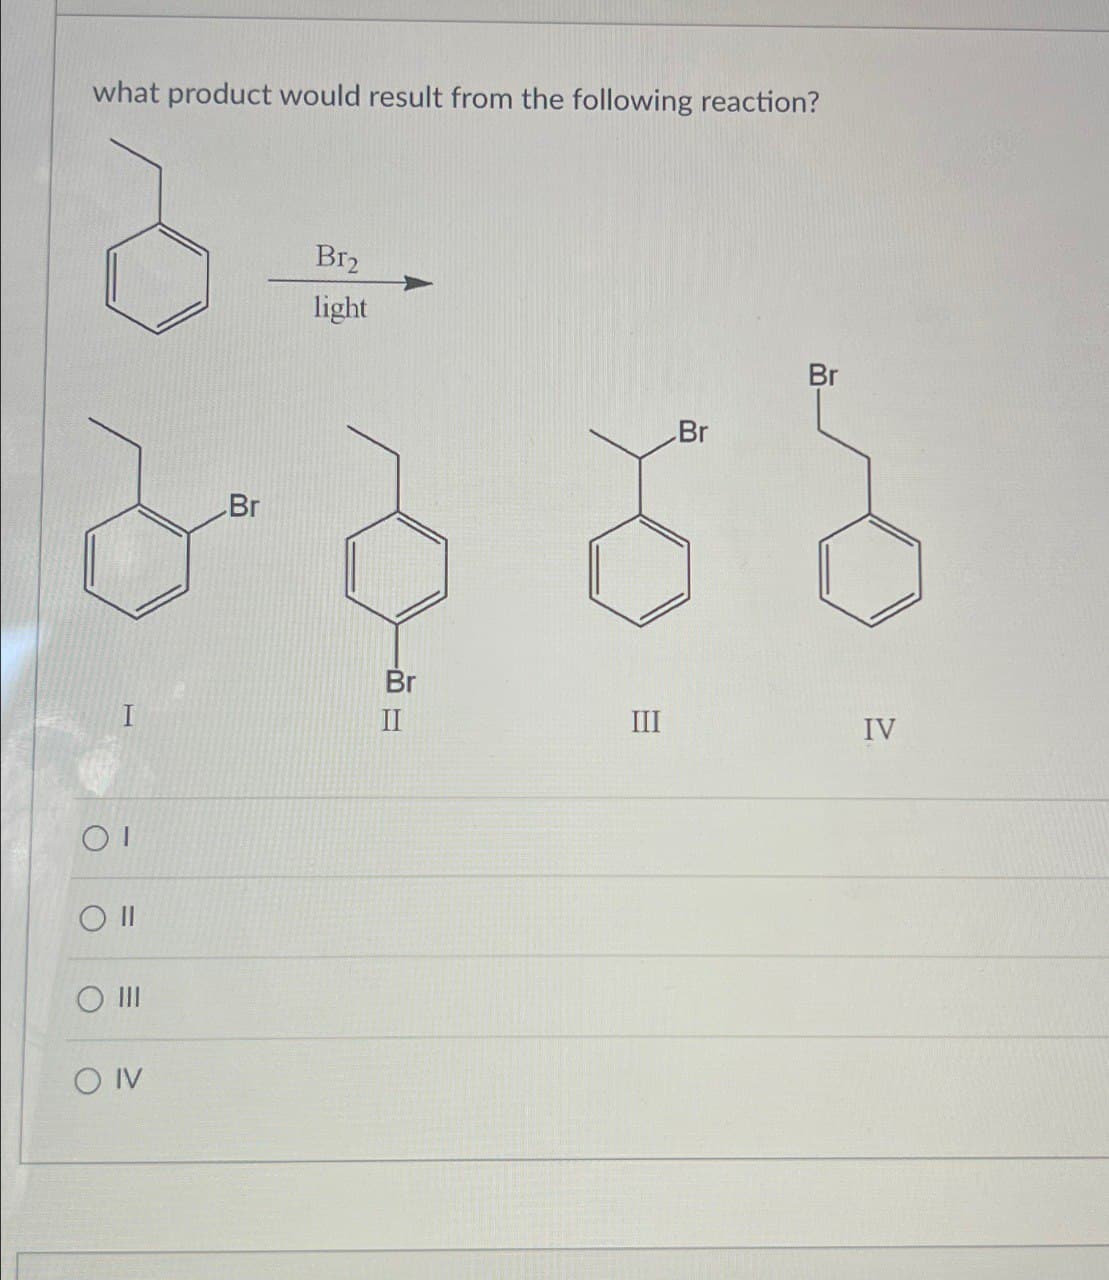 what product would result from the following reaction?
ΟΙ
O II
O III
O IV
Br
Br2
light
Br
Br
Br
III
IV